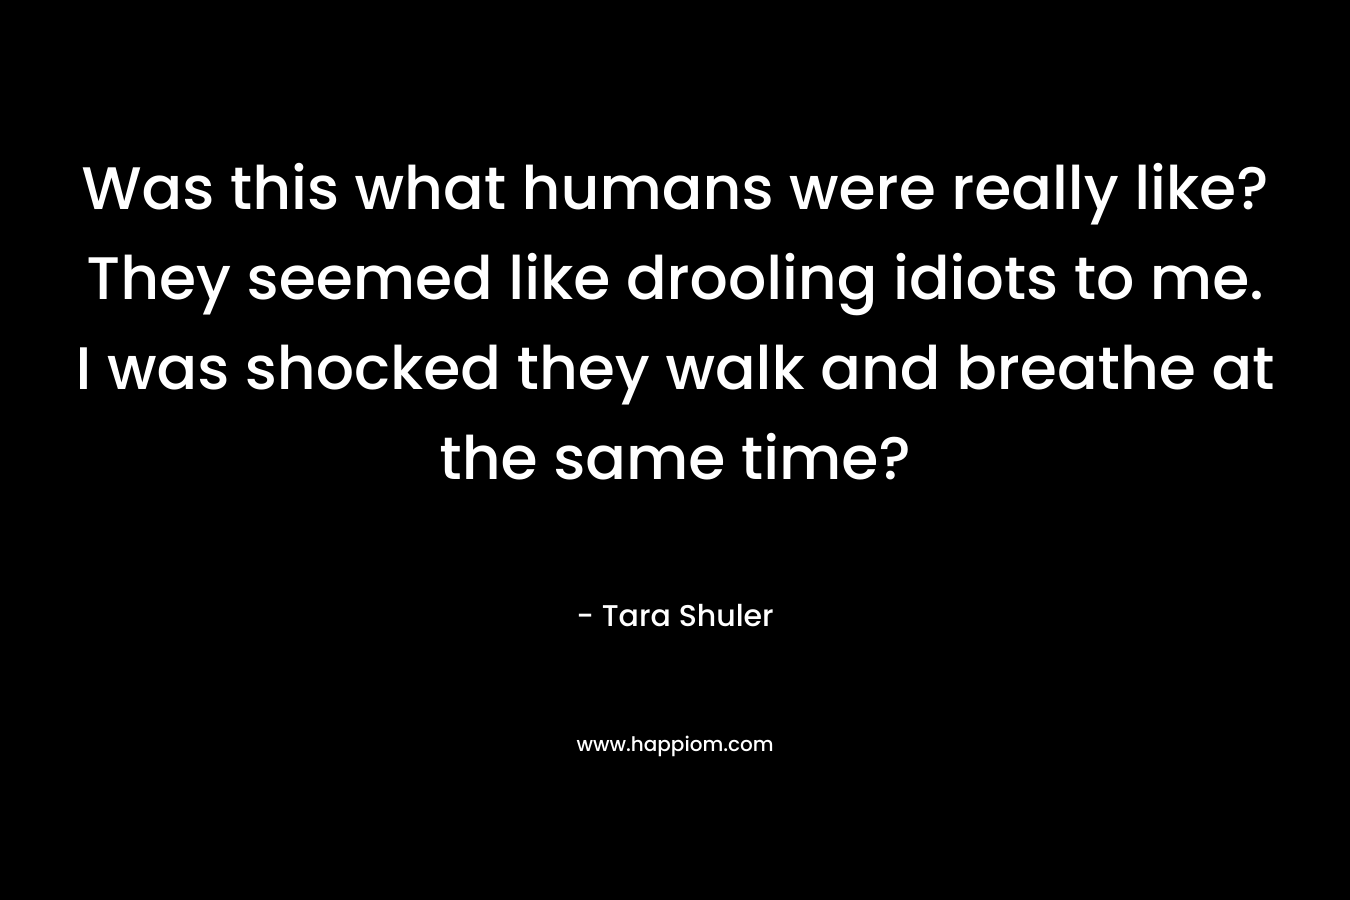 Was this what humans were really like? They seemed like drooling idiots to me. I was shocked they walk and breathe at the same time? – Tara Shuler